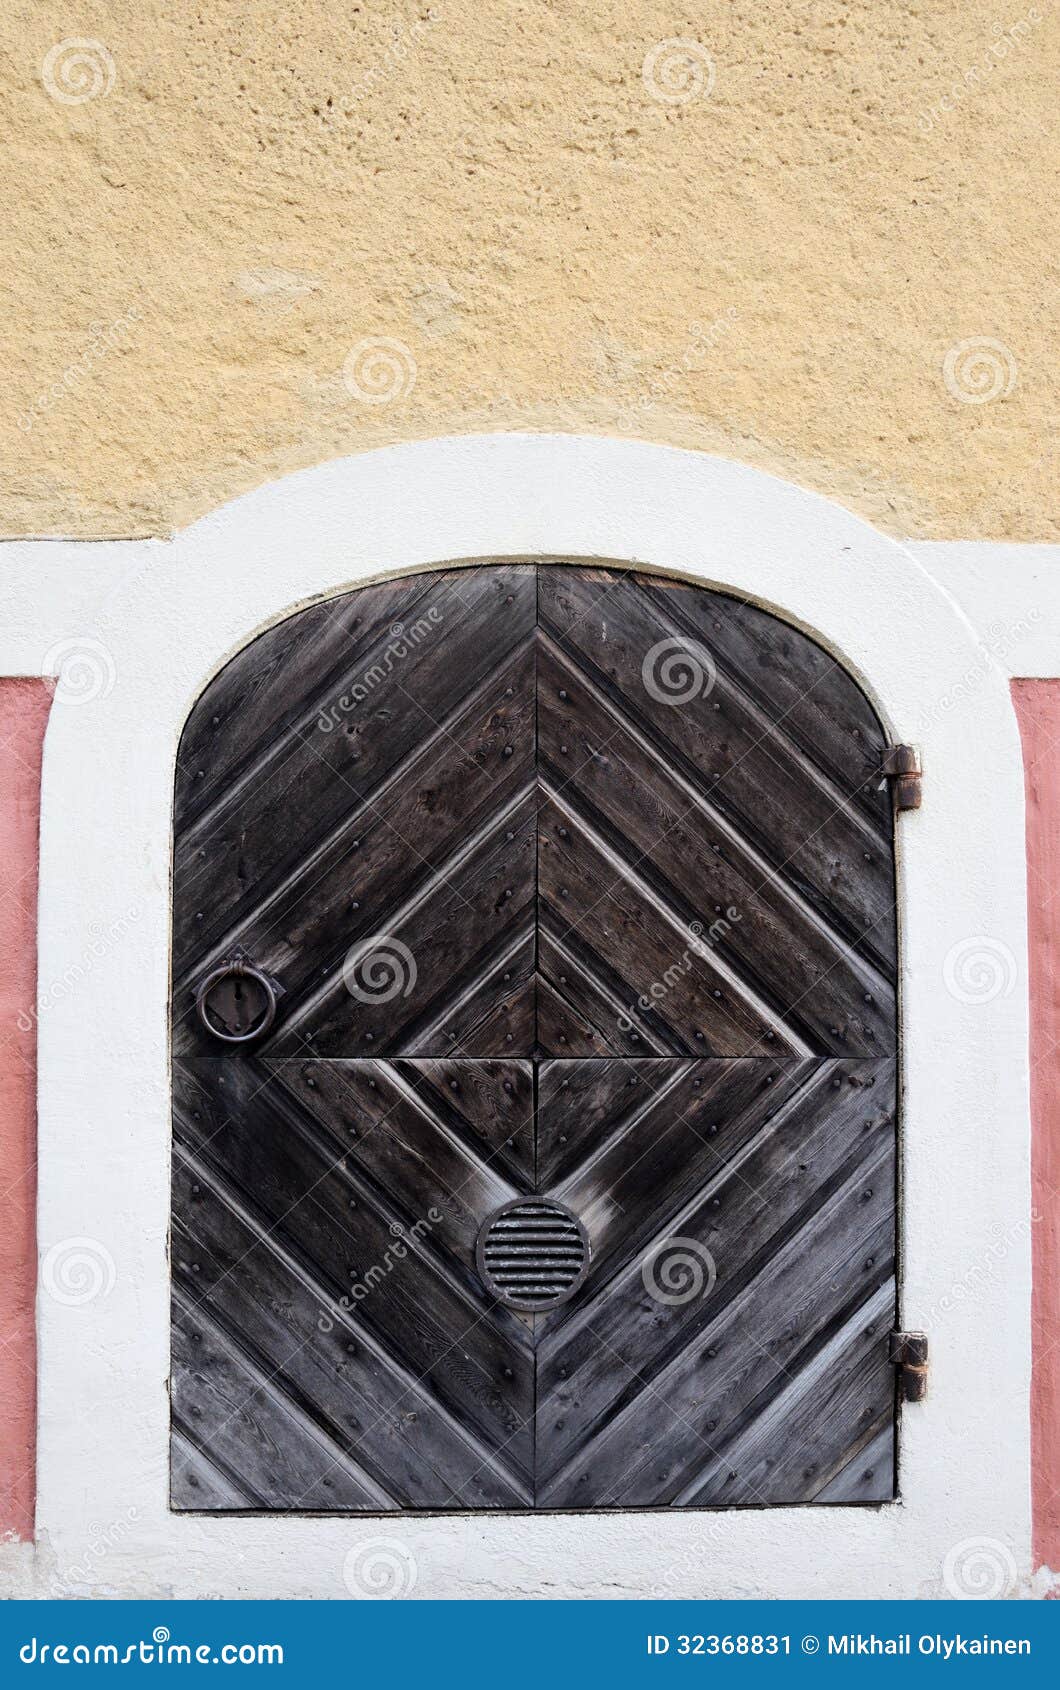 Wooden old door with wrought-iron hinges and ring.